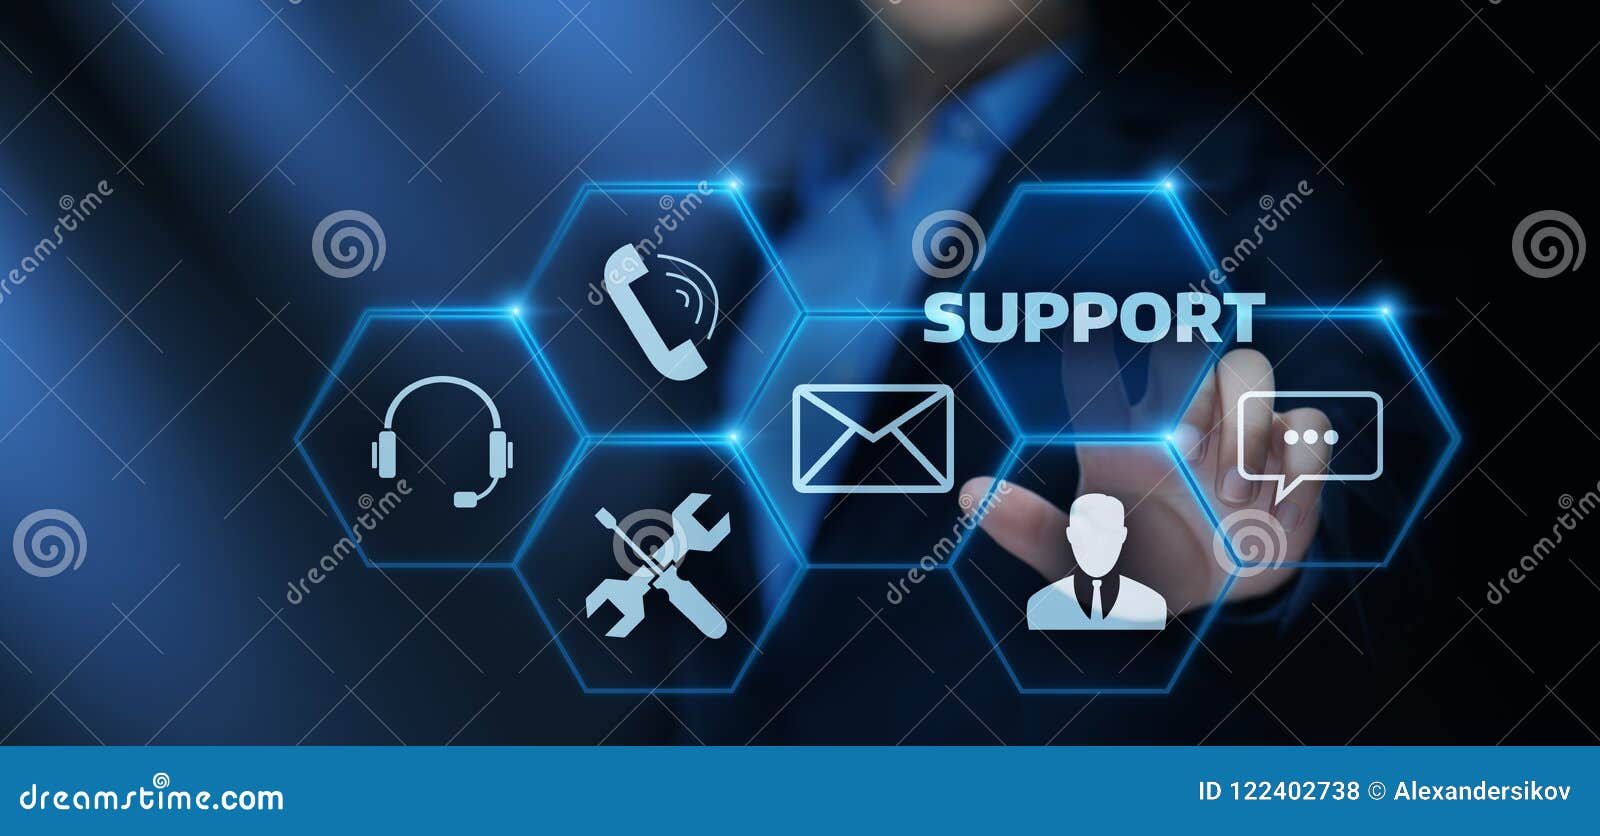 customer technical support